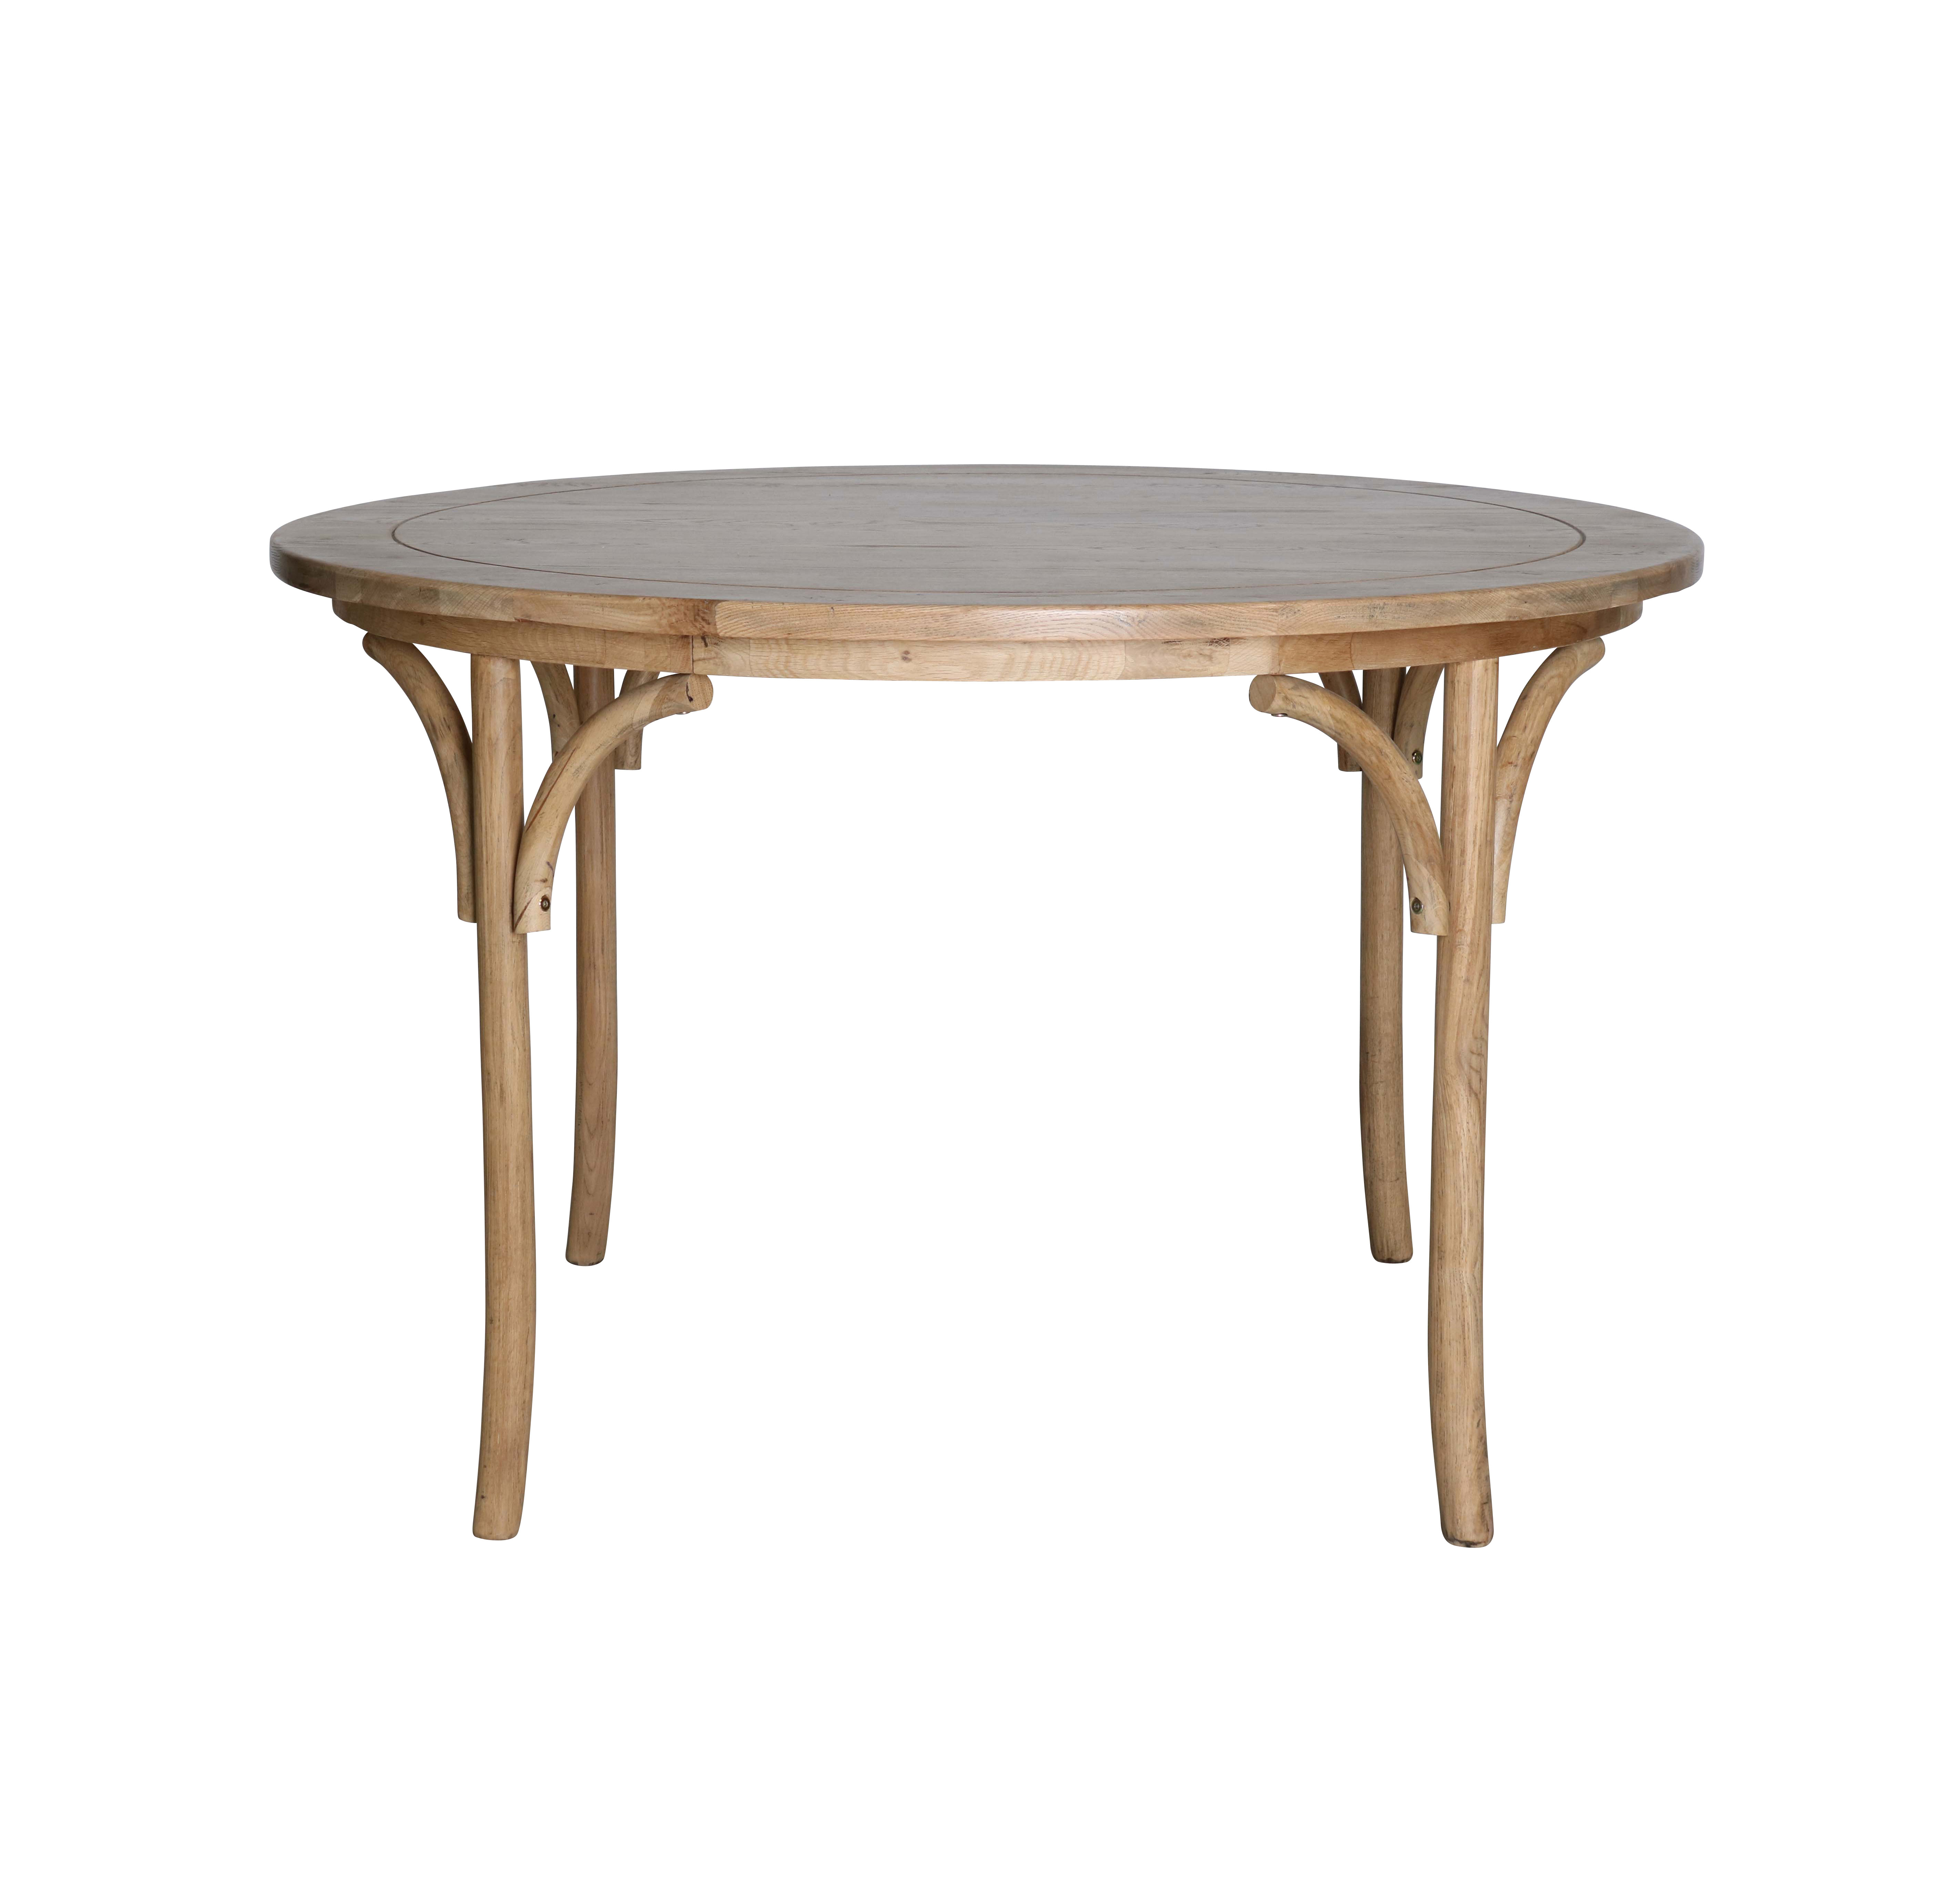 Block & Chisel round oak wood dining table